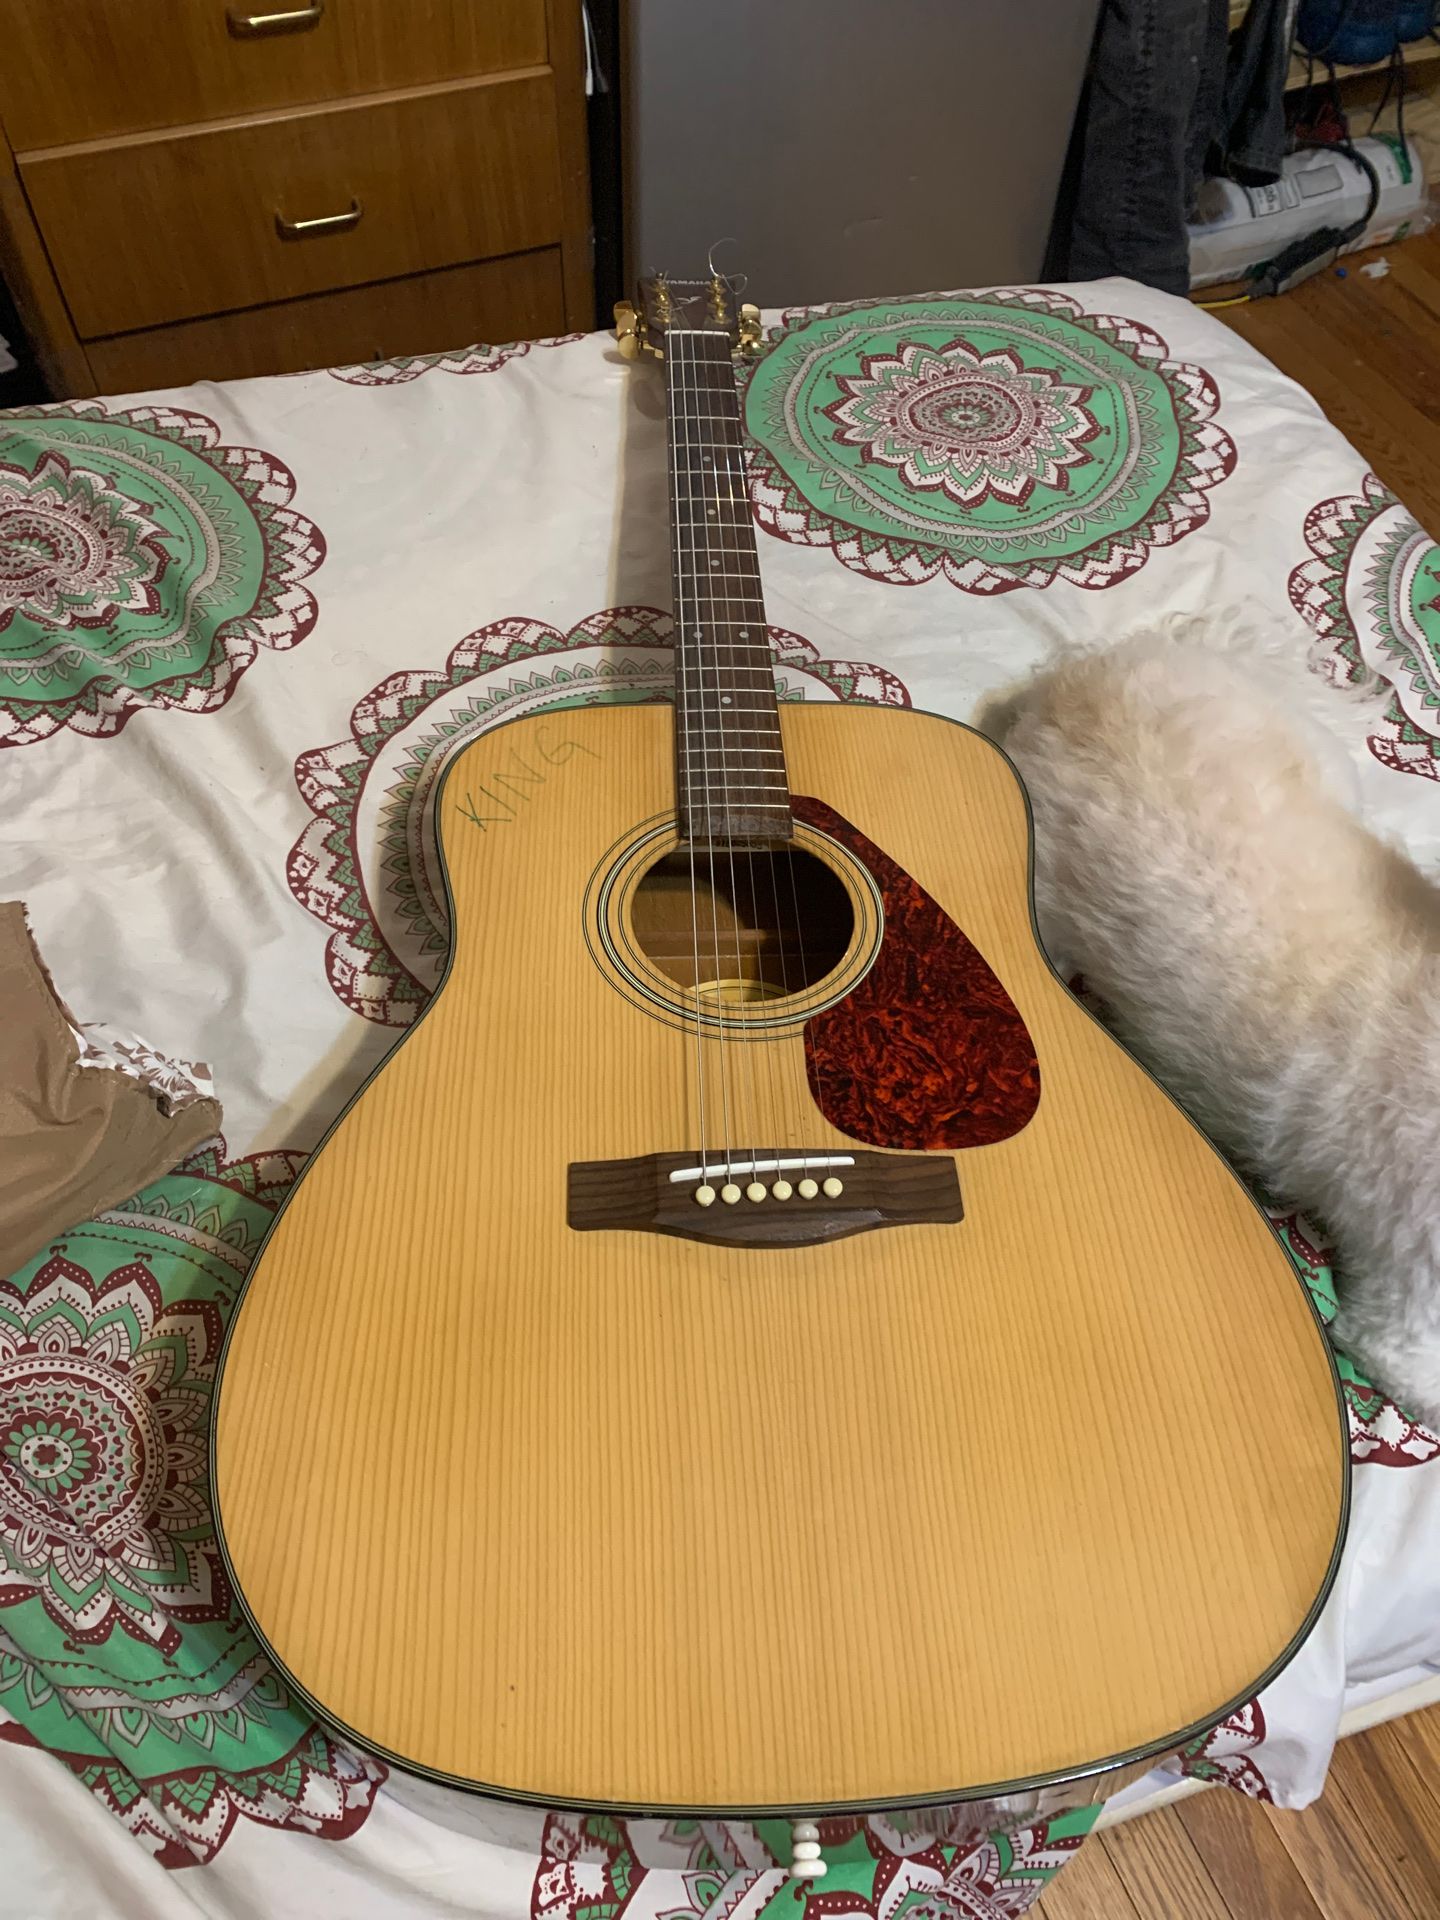 Yamaha F35 Guitar in very good condition